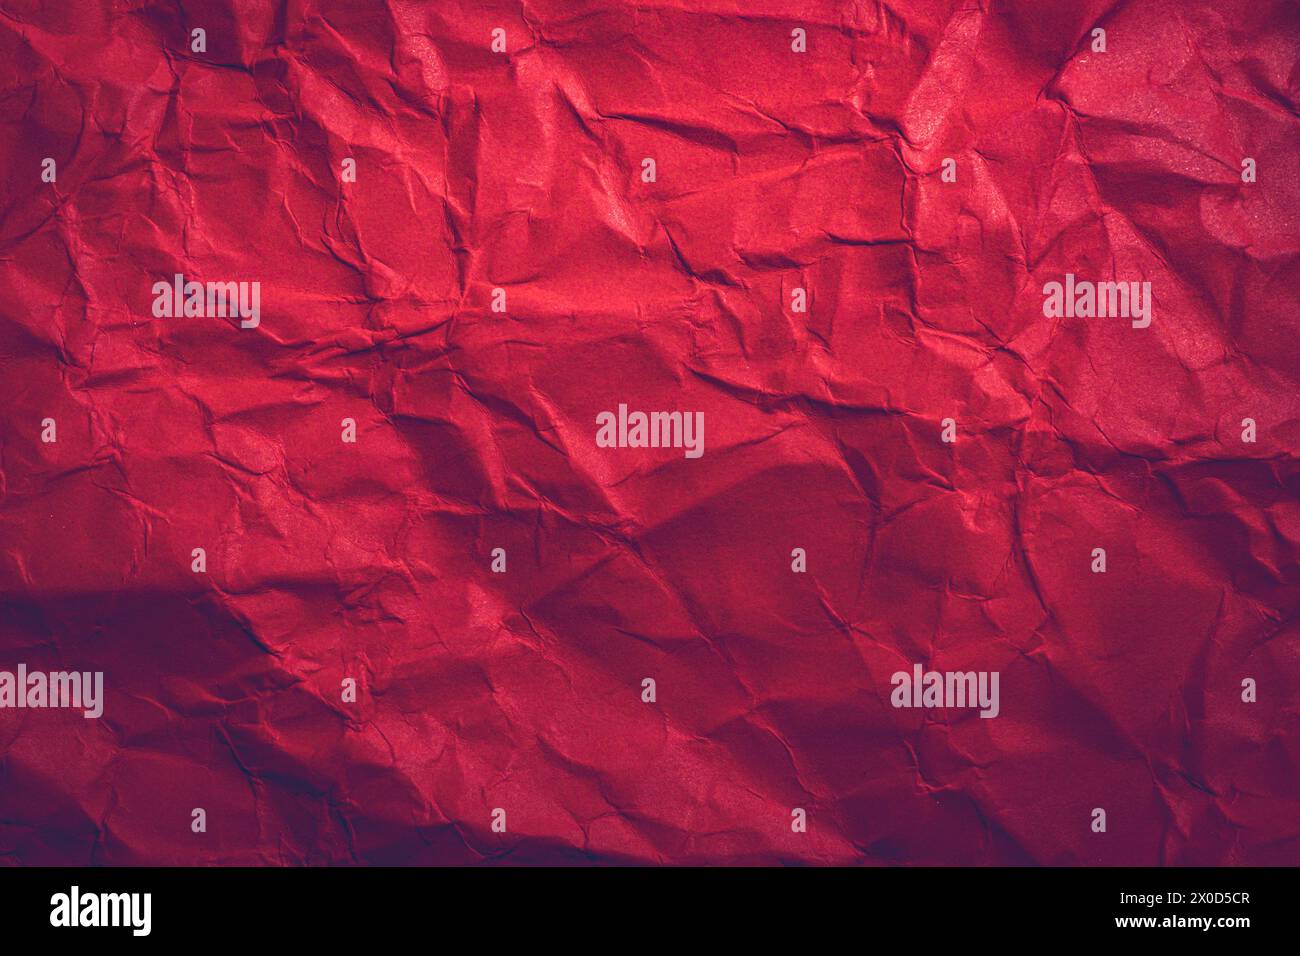 Red Paper Texture background. Crumpled Red paper abstract shape background. Stock Photo